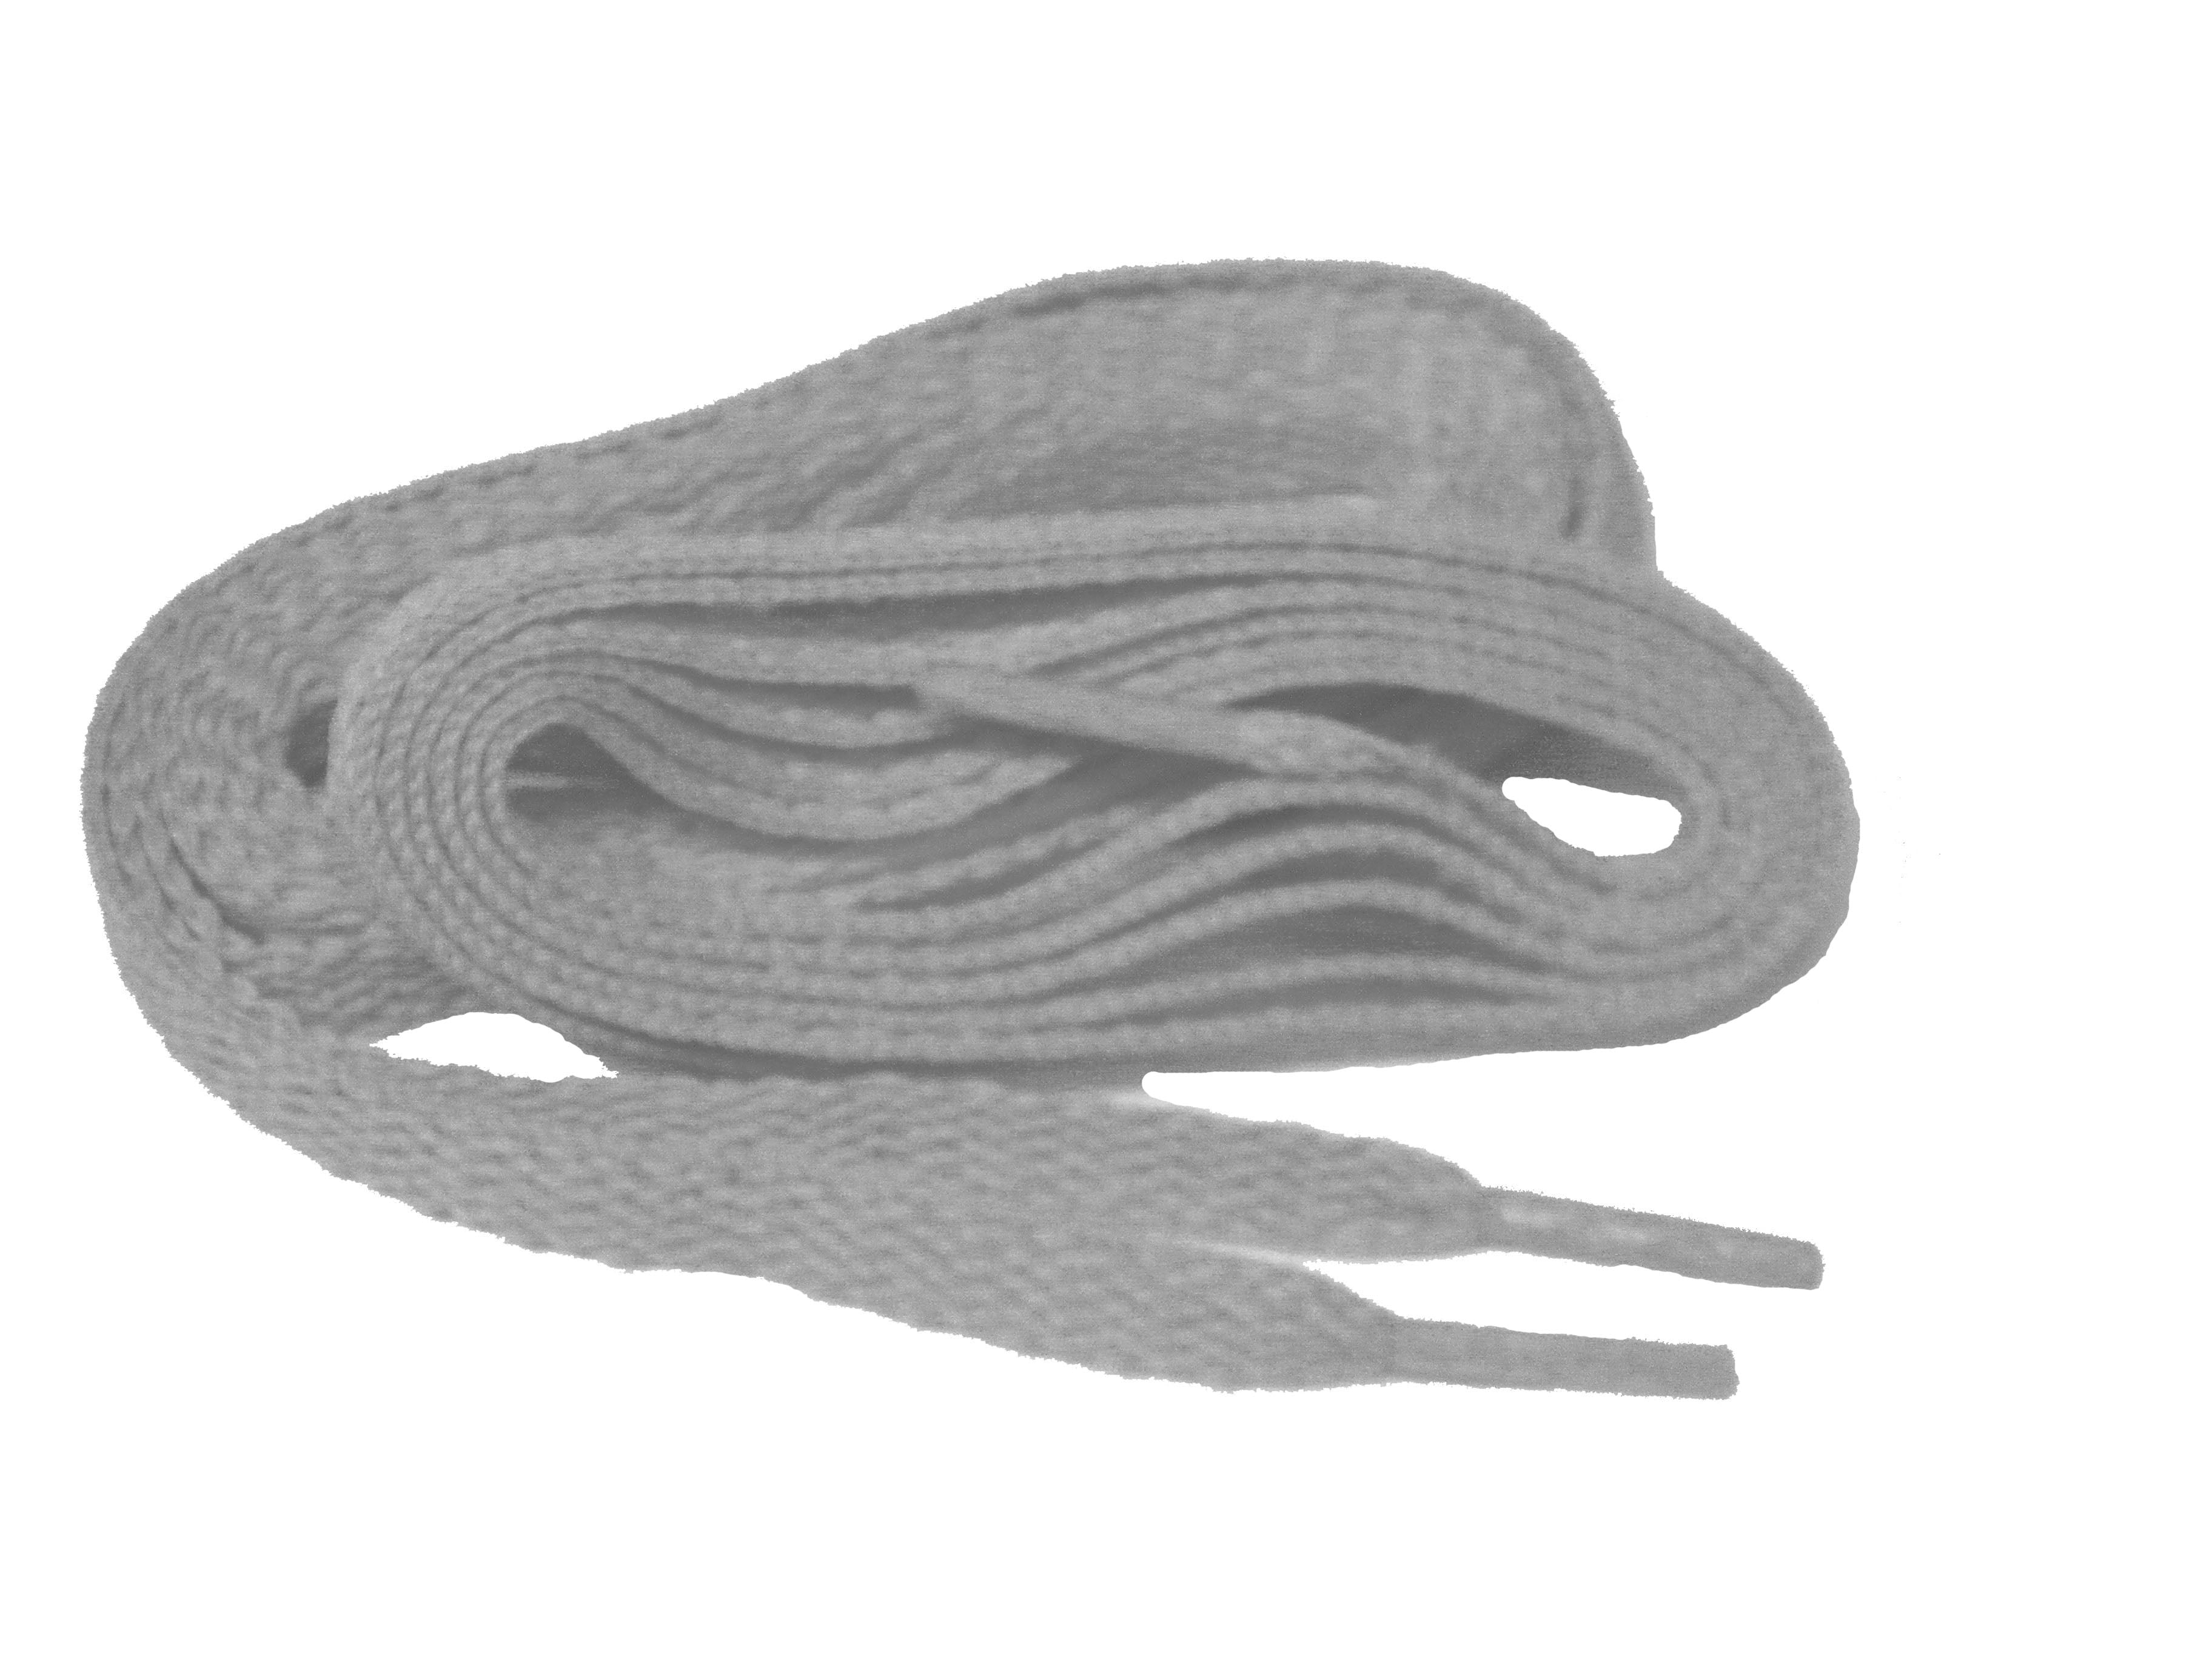 Thick Rope Shoelaces 5/16 Inch: white, black, beige, pink, blue